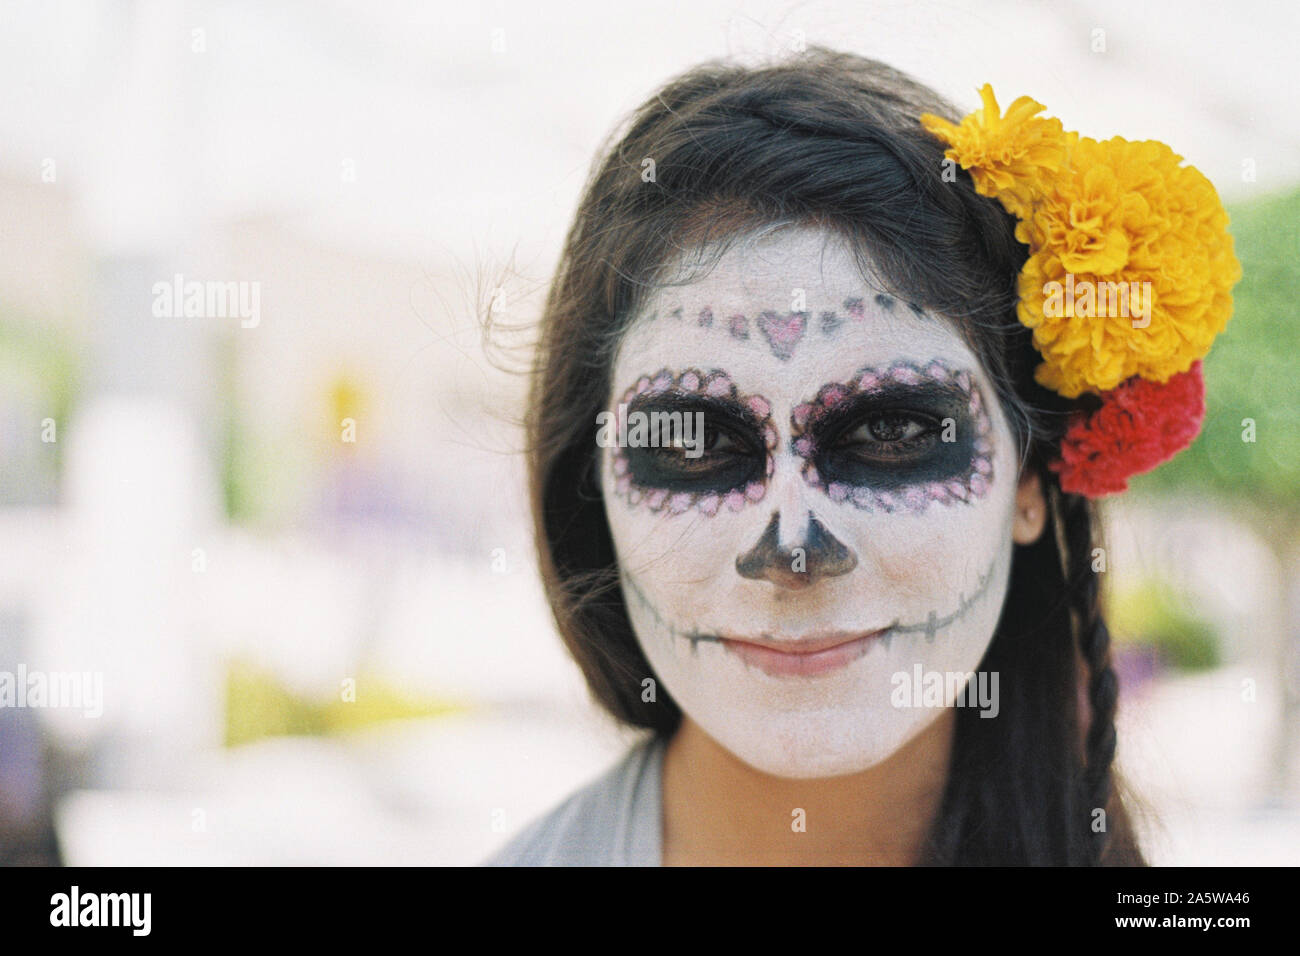 Merida, Yucatan, Mexico - October 30, 2015: Mexican young girl in Catrina makeup for the Day of the Dead or Hanal Pixan celebration Stock Photo